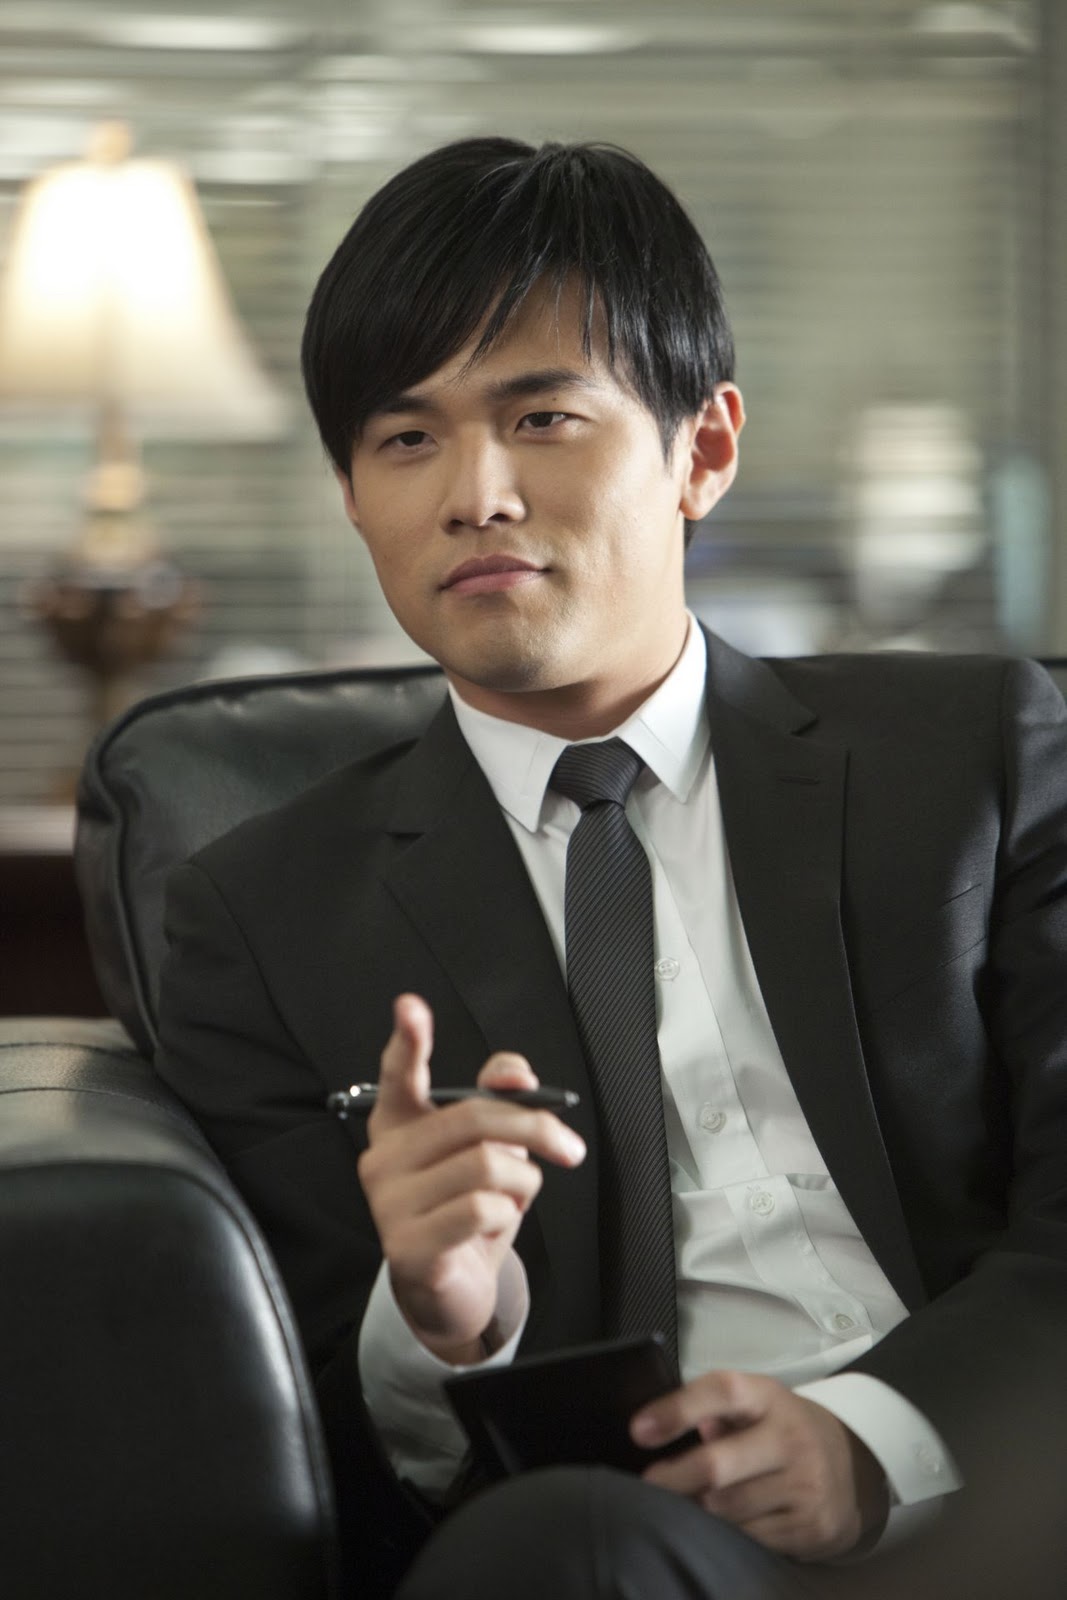 Chinese na Makulit: JAY CHOU IS KATO IN “THE GREEN HORNET”
 Kato Green Hornet